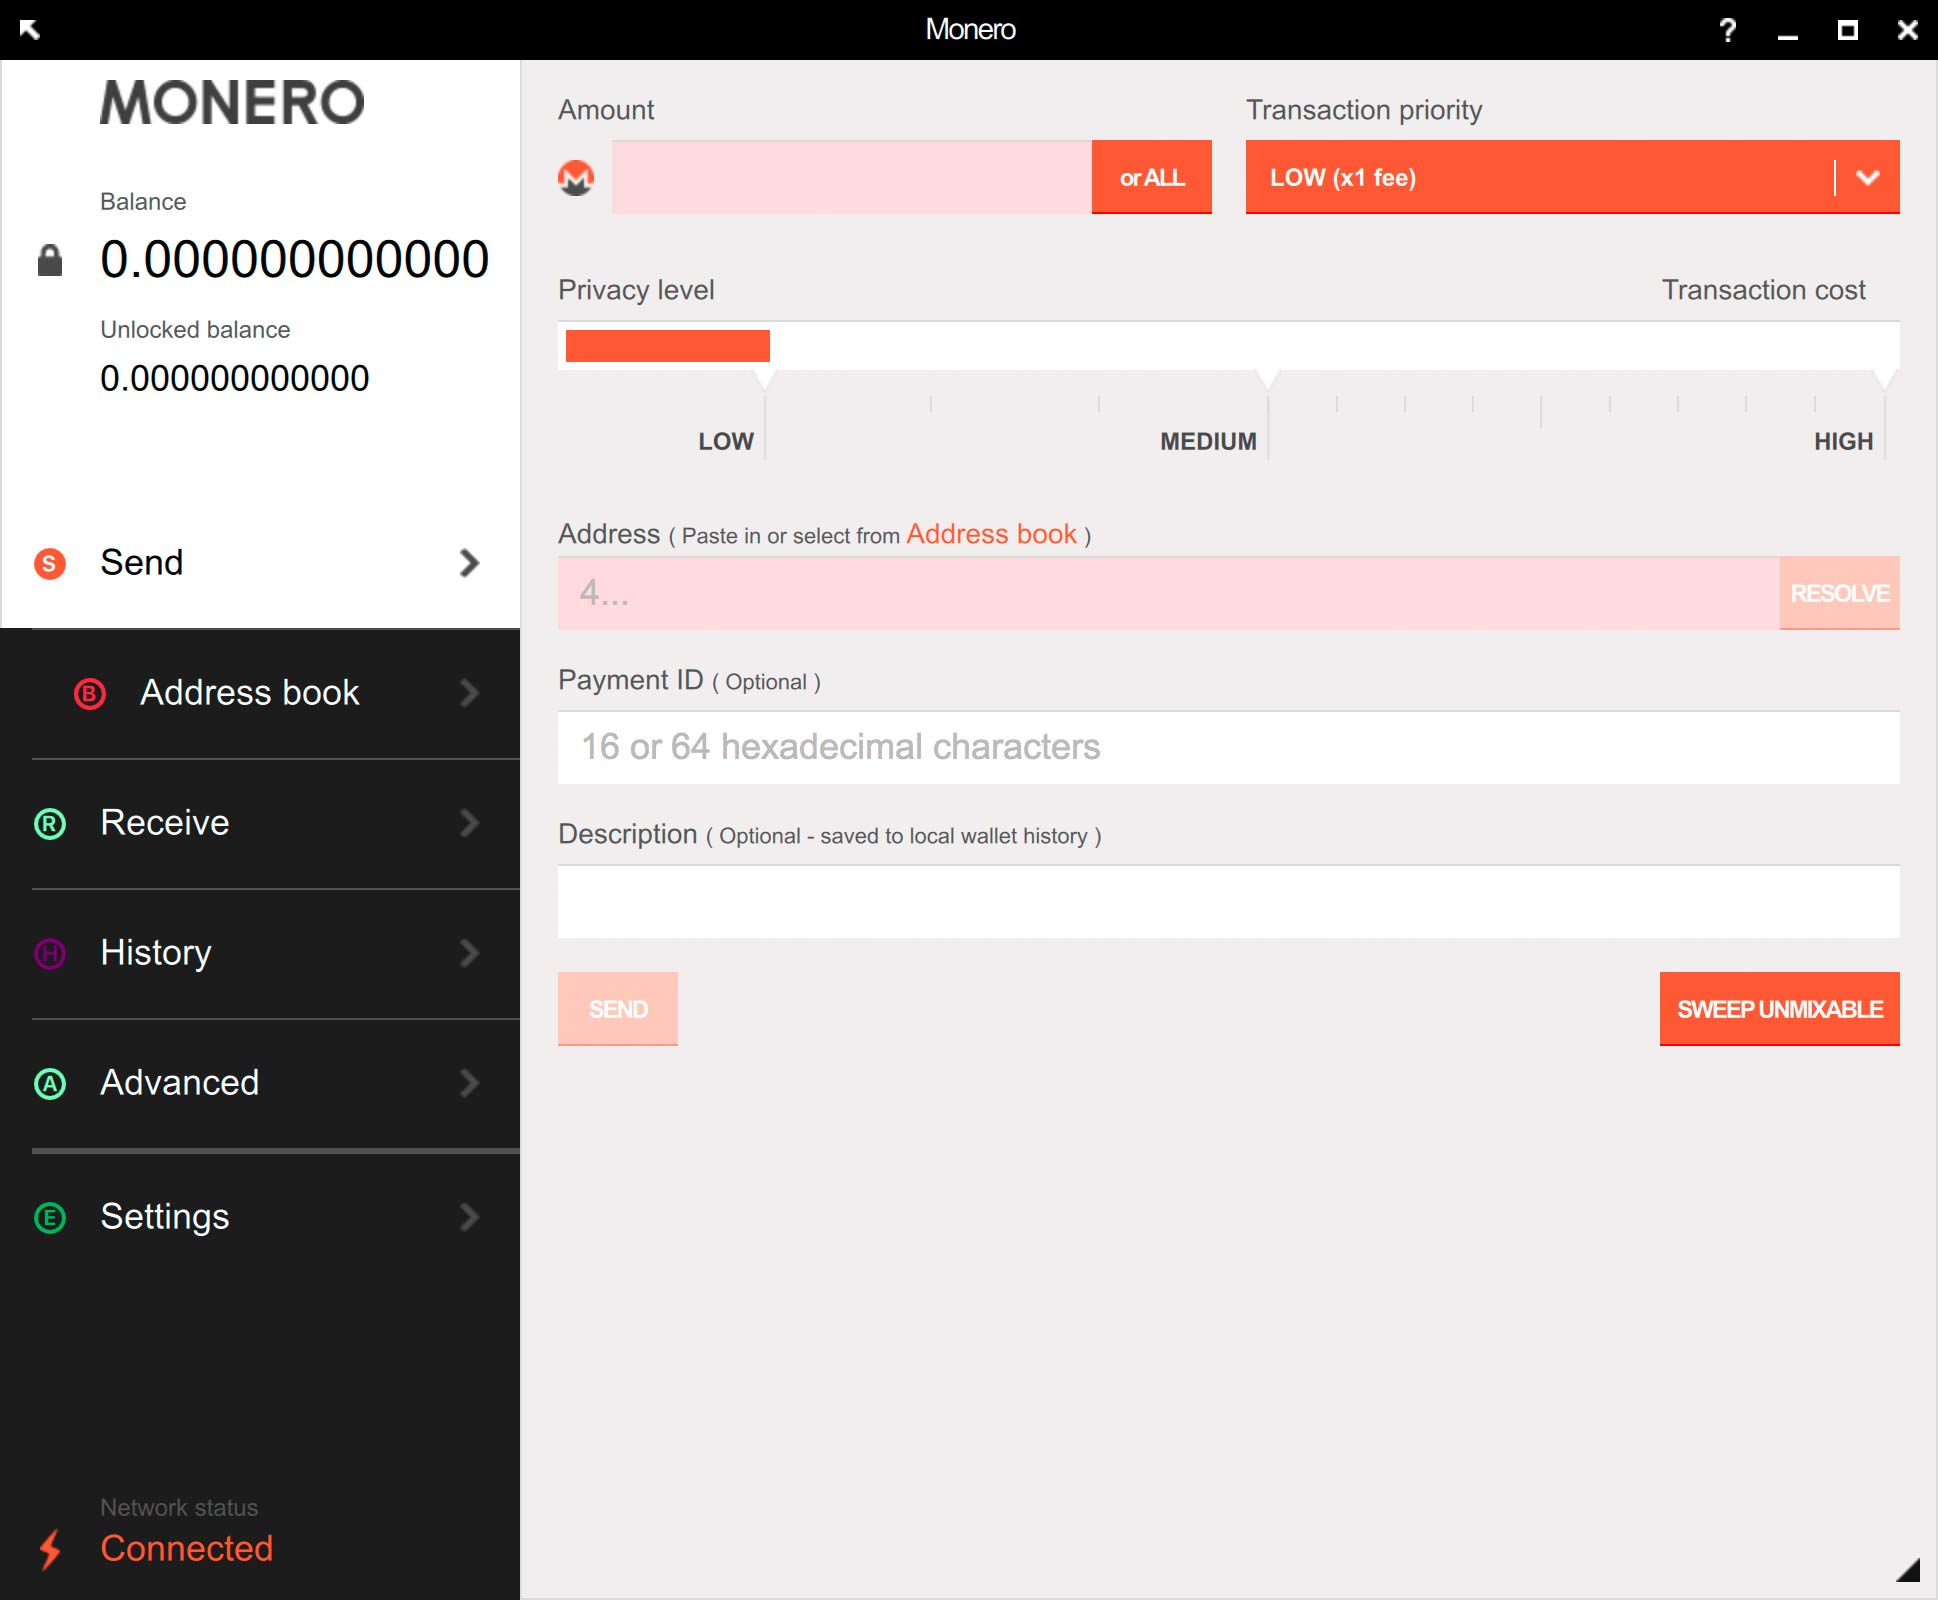 How to use the Monero GUI wallet